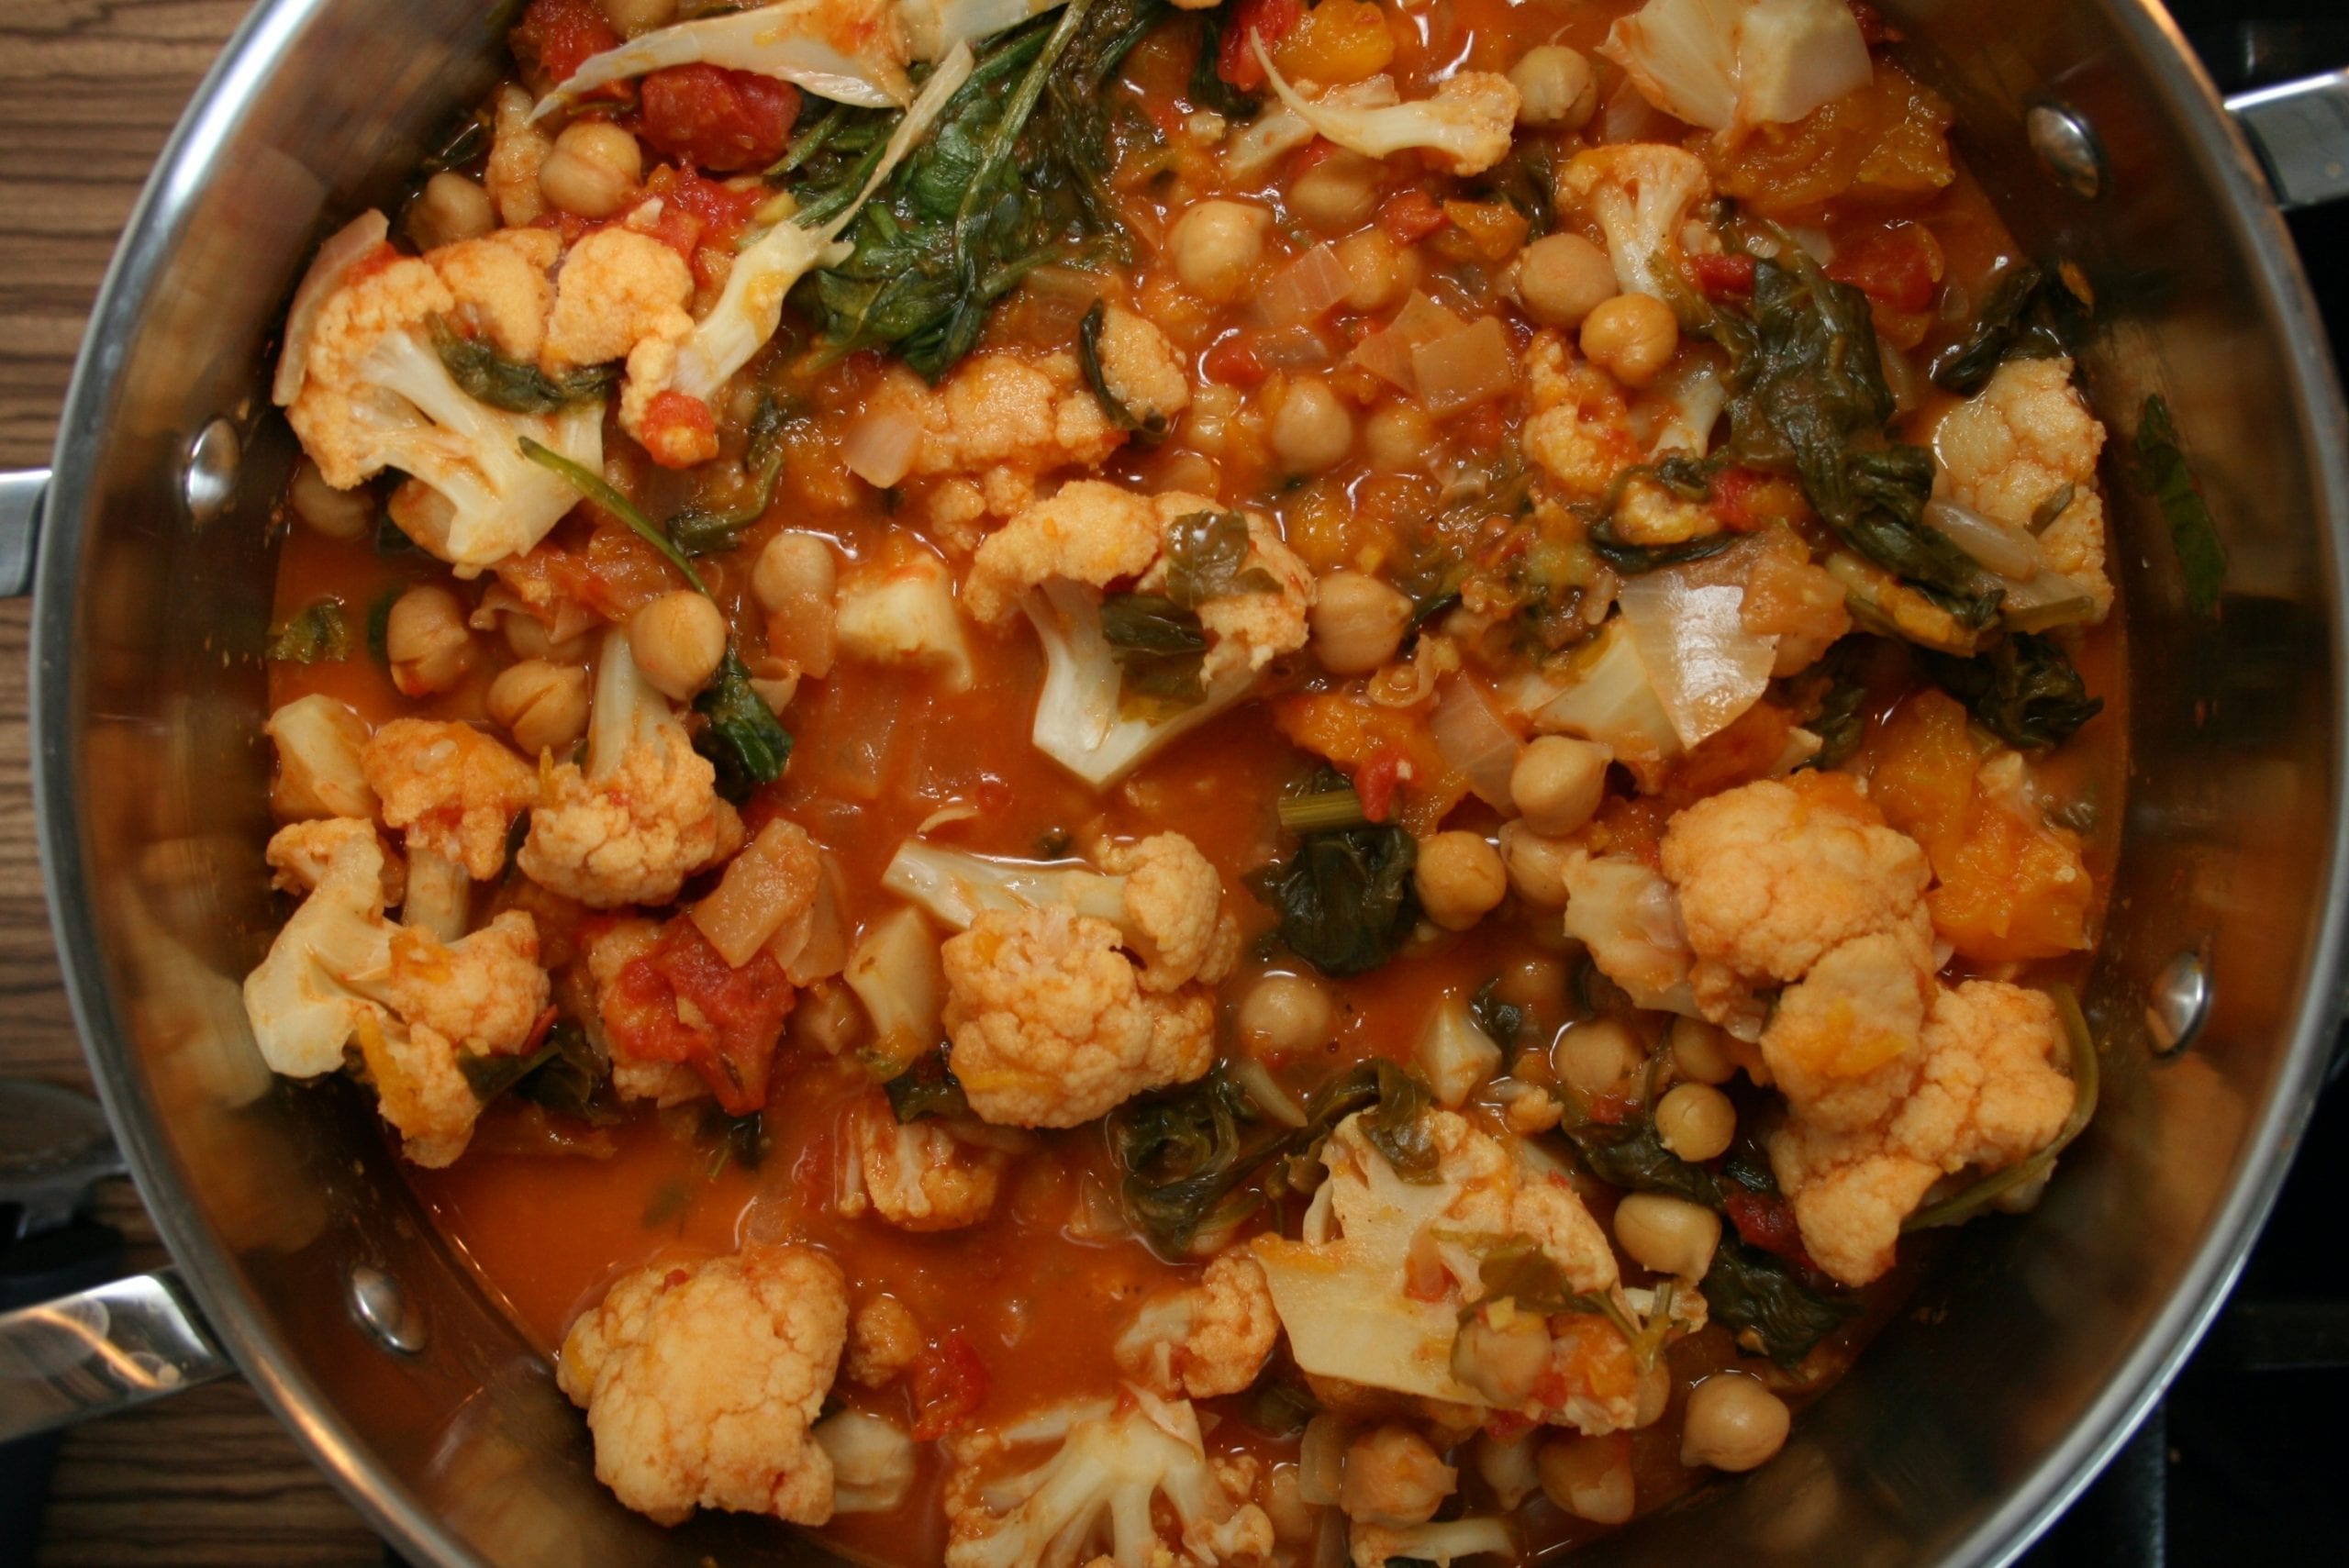 recipe, dinner, lunch, curry, Indian food, spicy, cauliflower, pumpkin, tomato, ginger, spinach, chickpeas, plant-based, vegan, lactose-free, casein-free, egg-free, oil-free, sugar-free, whole food